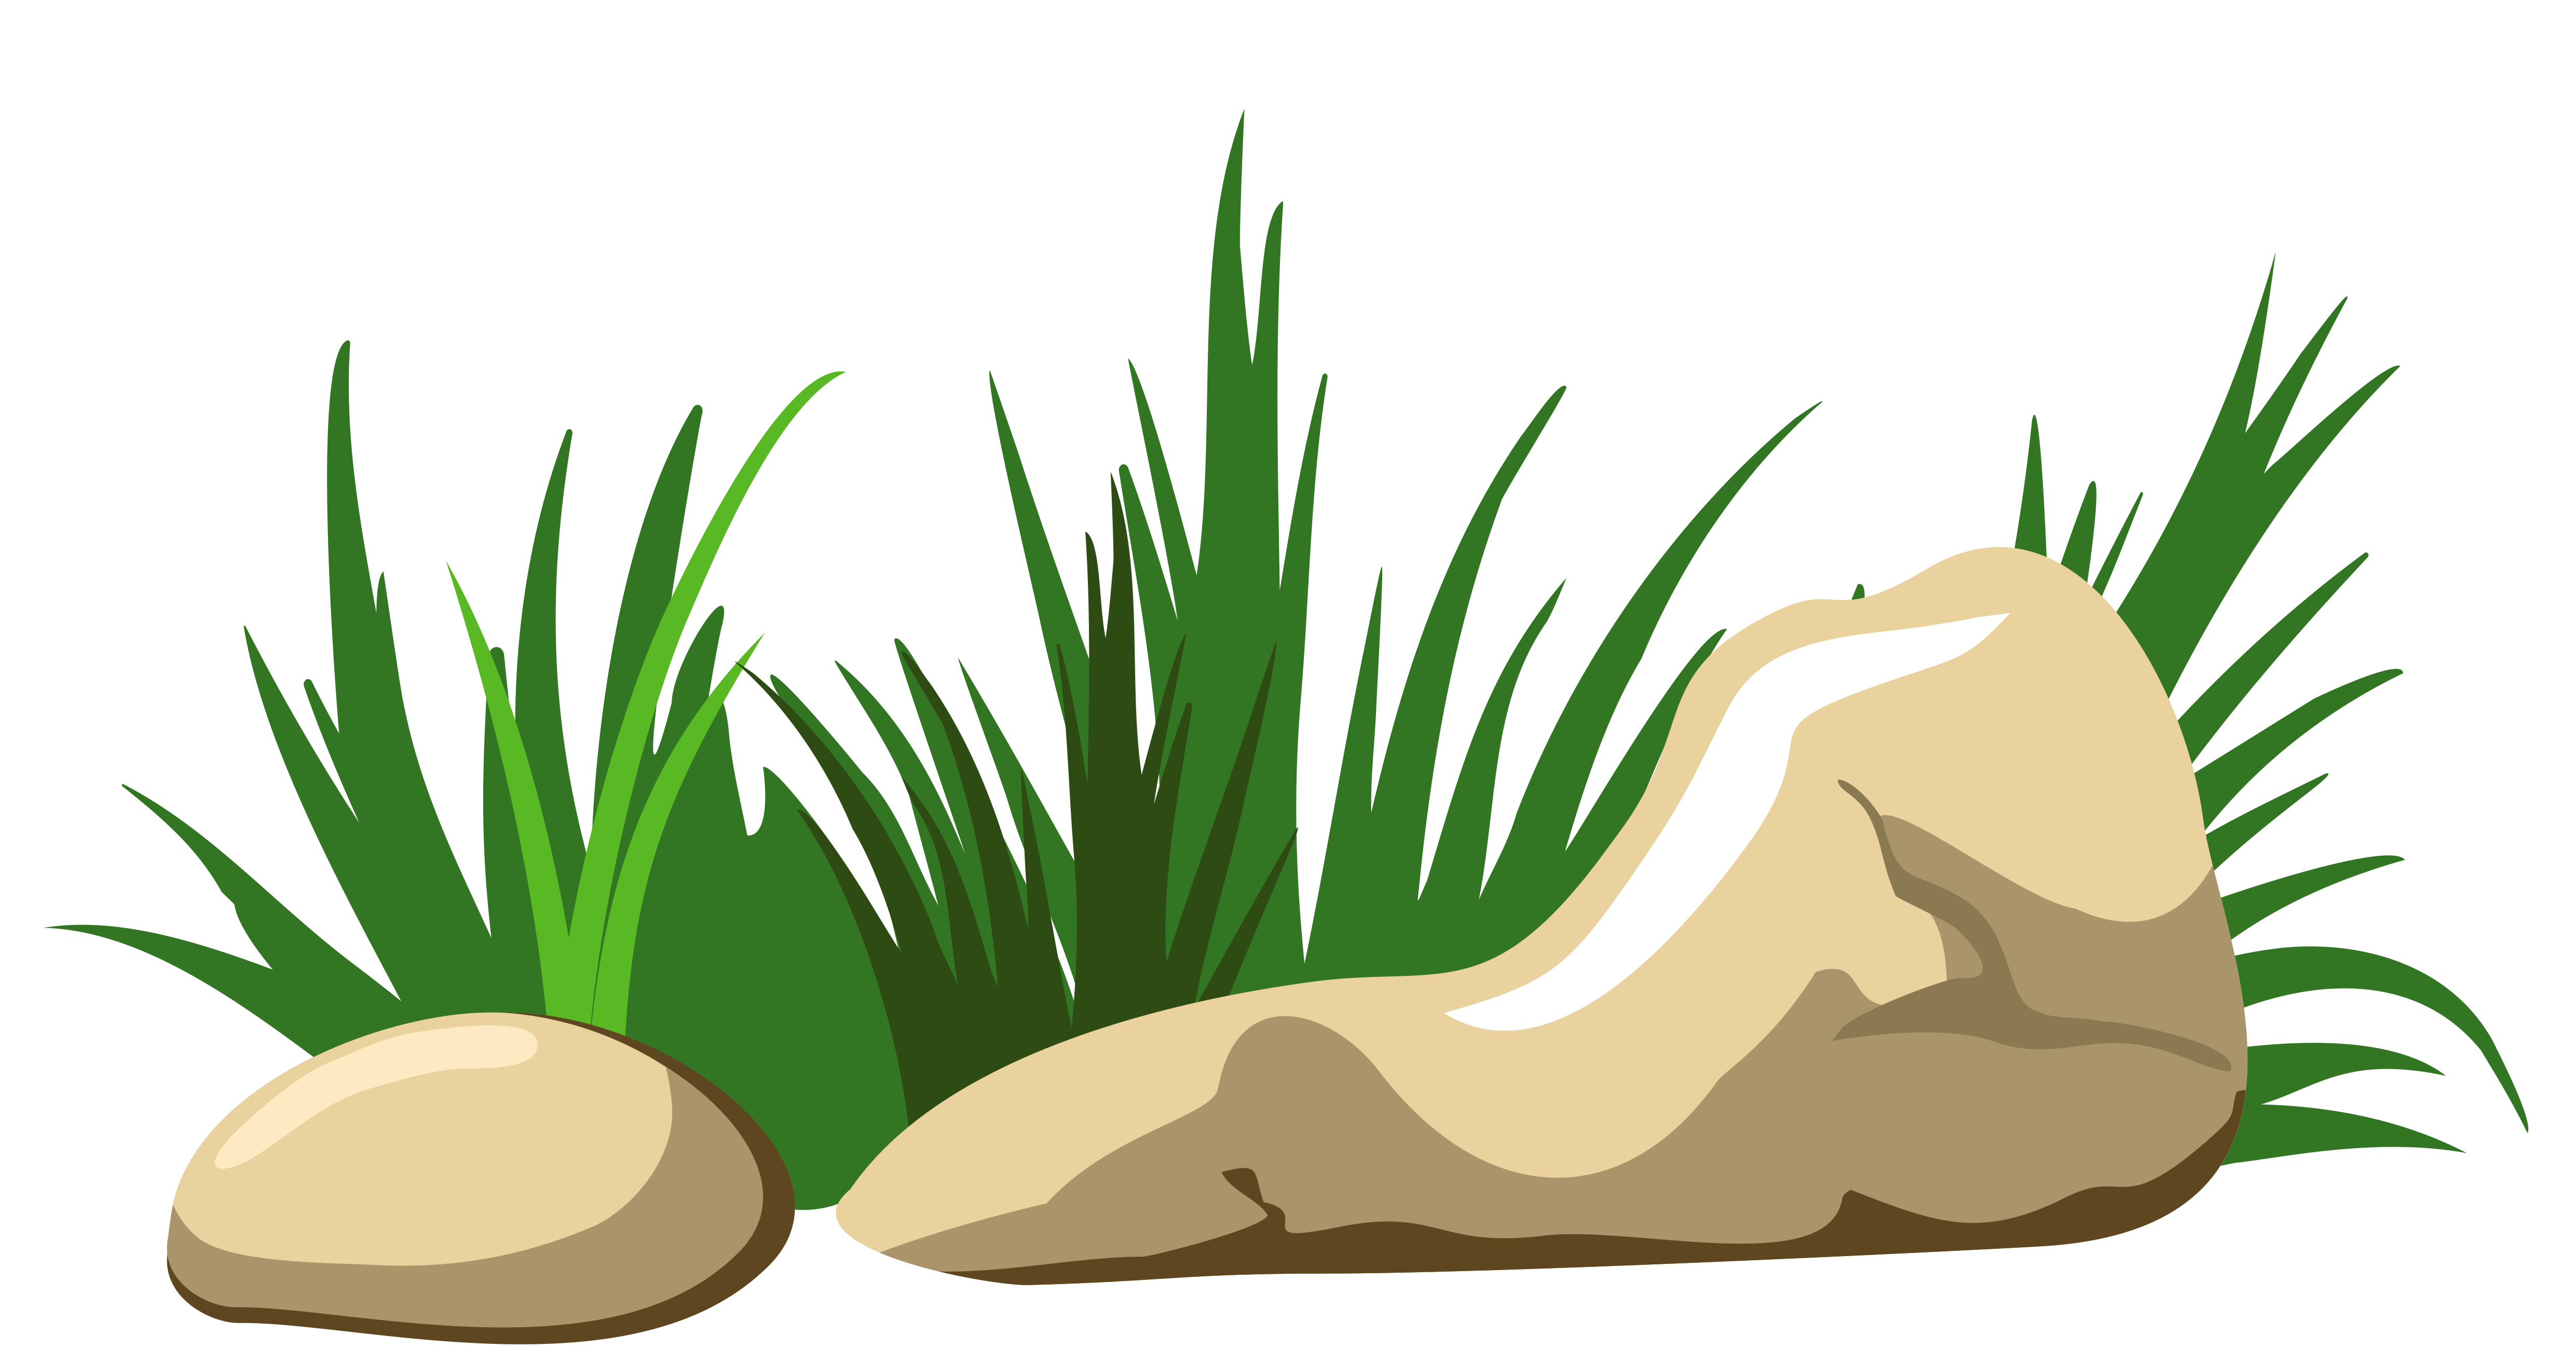 Grass and stones transparent. Swamp clipart grassy path